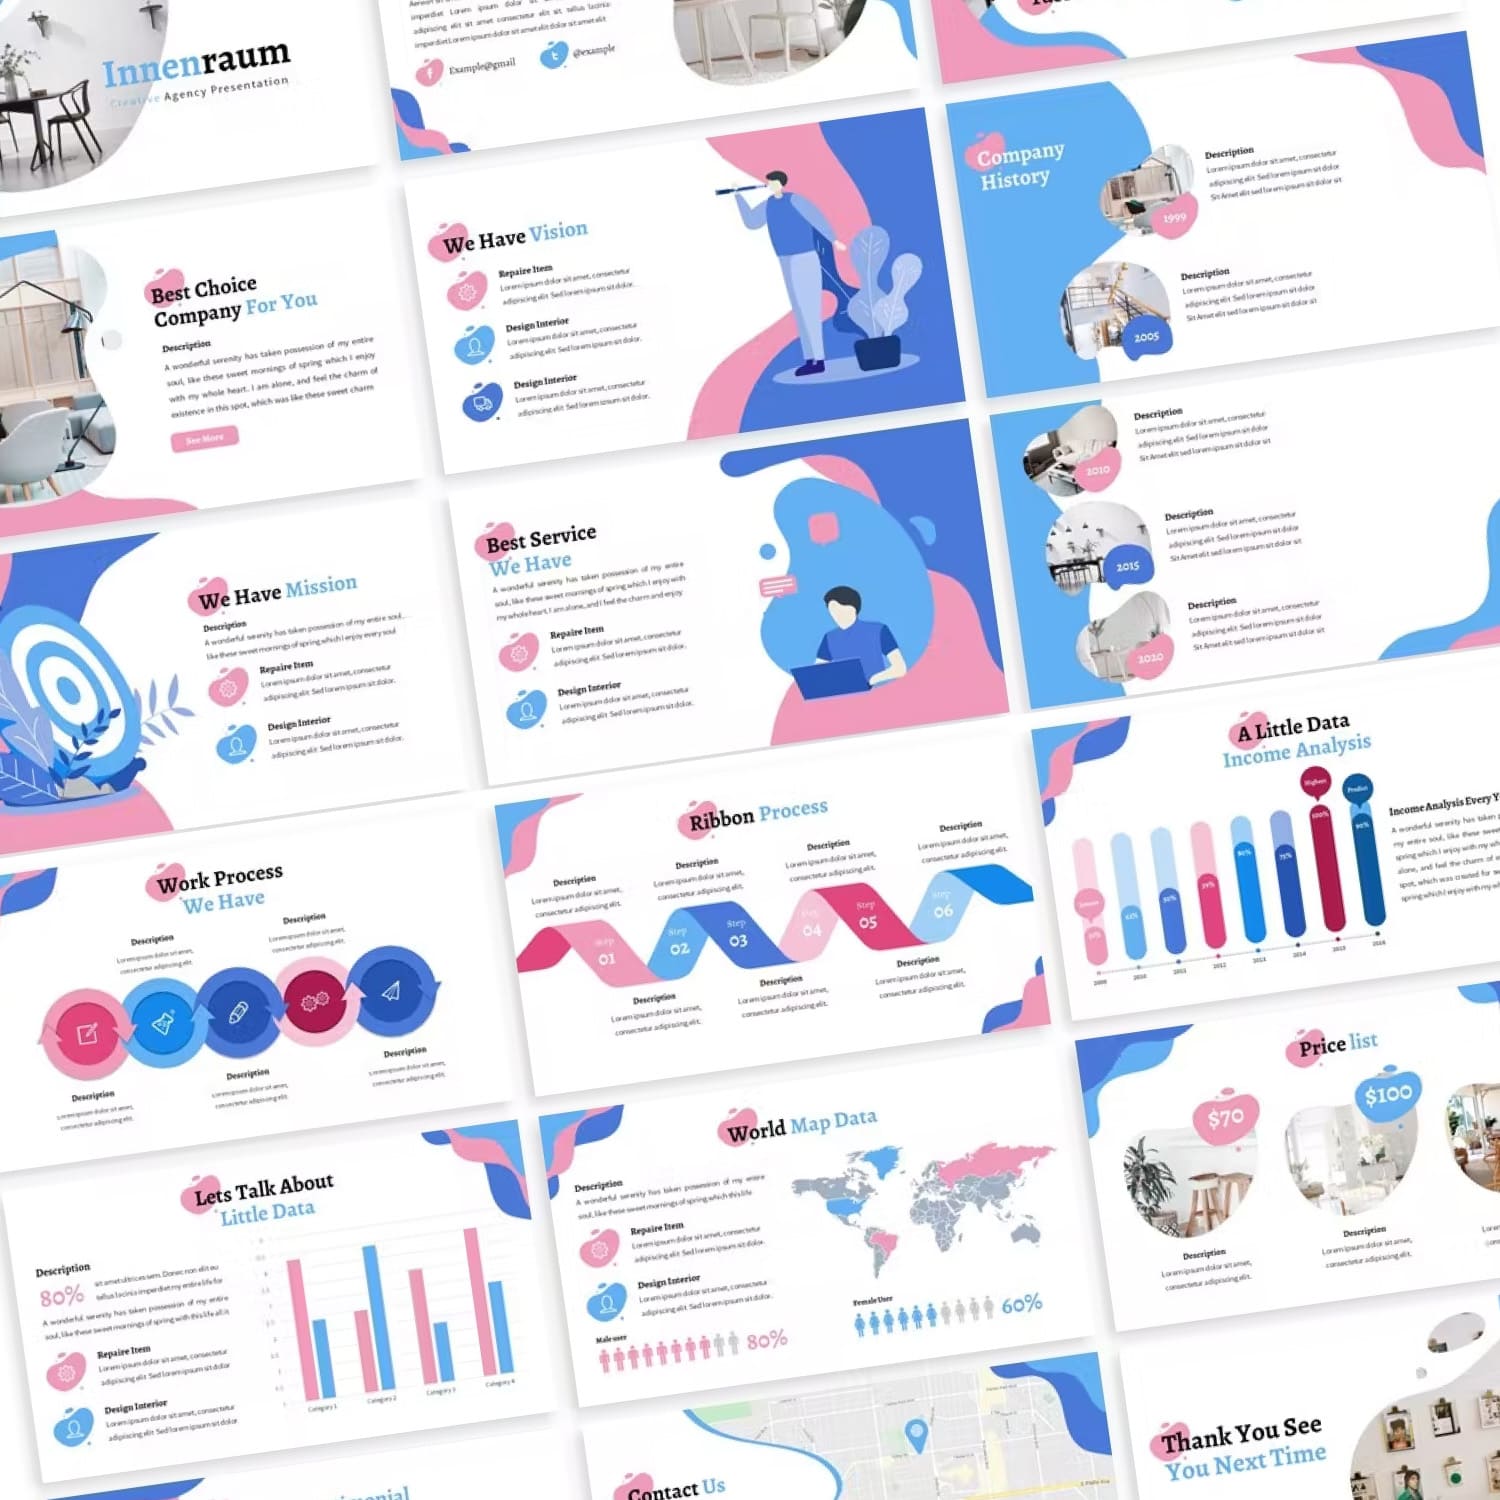 Innenraum abstract powerpoint template from SlideFactory.